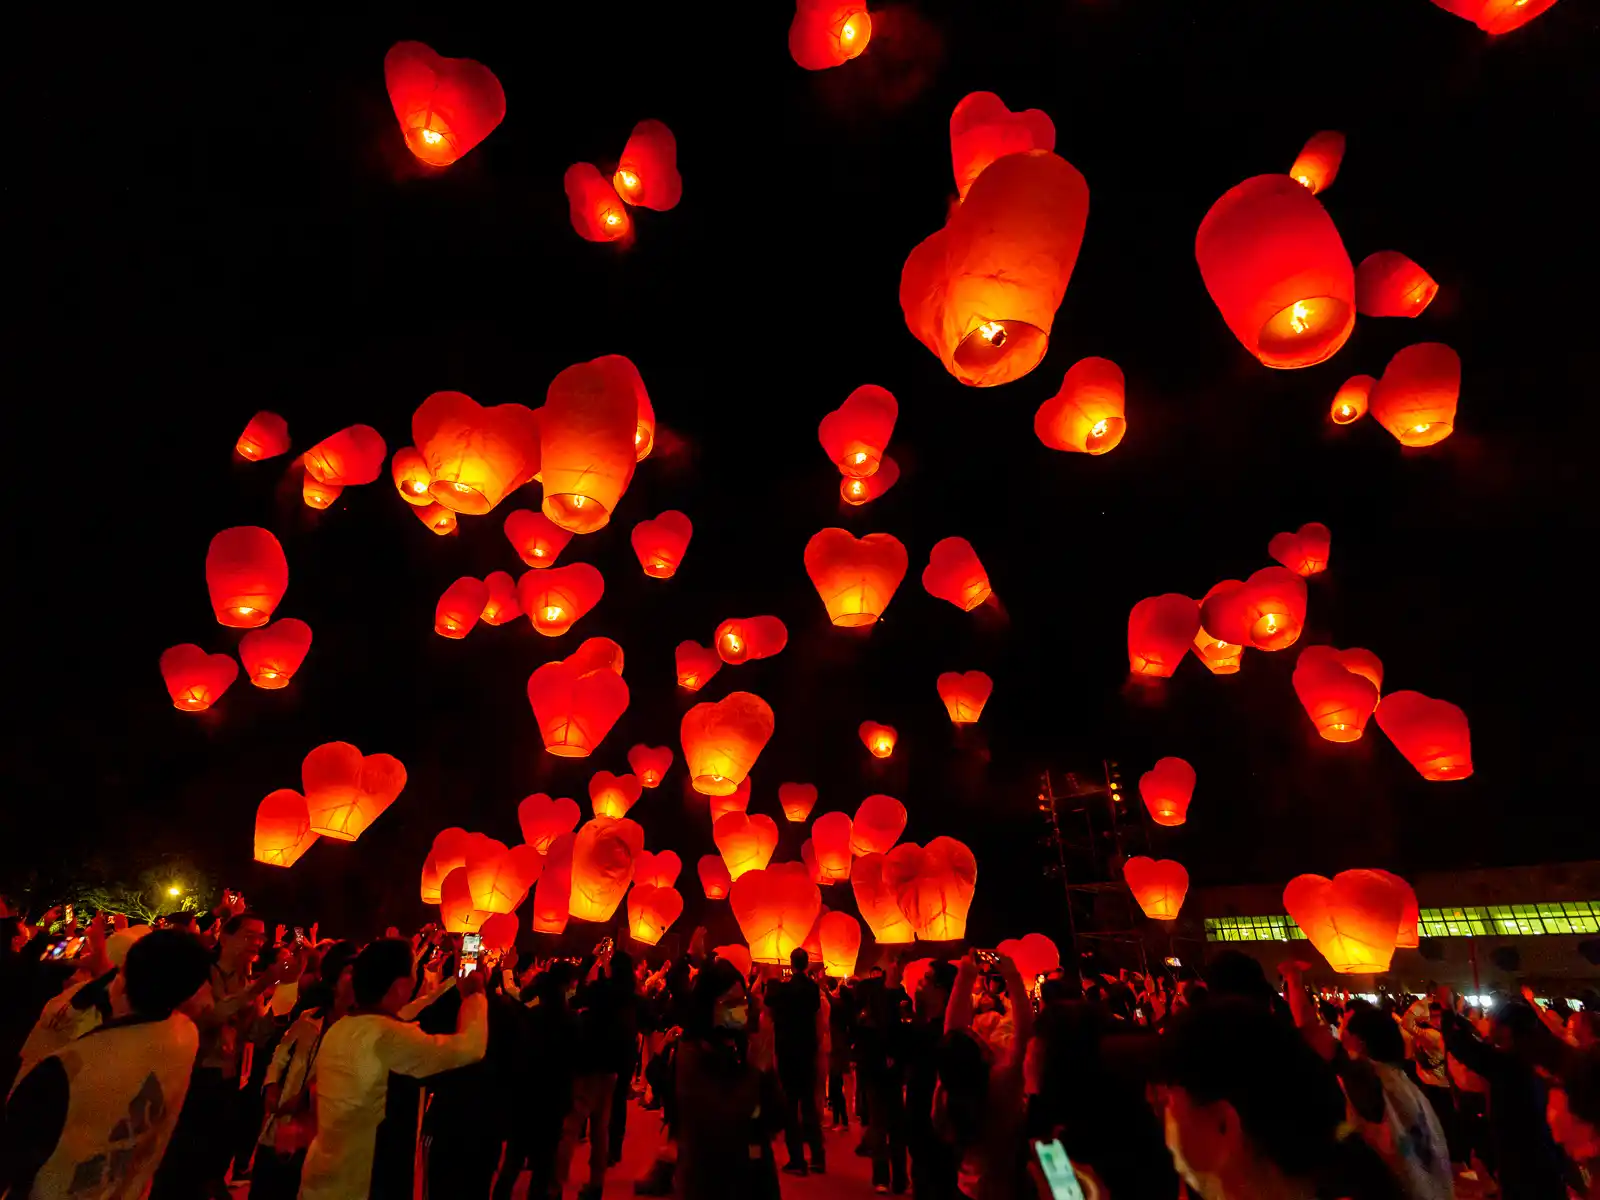 Glowing red lanterns that have just been released rise up above the crowd at the Pingxi Lantern Festival.